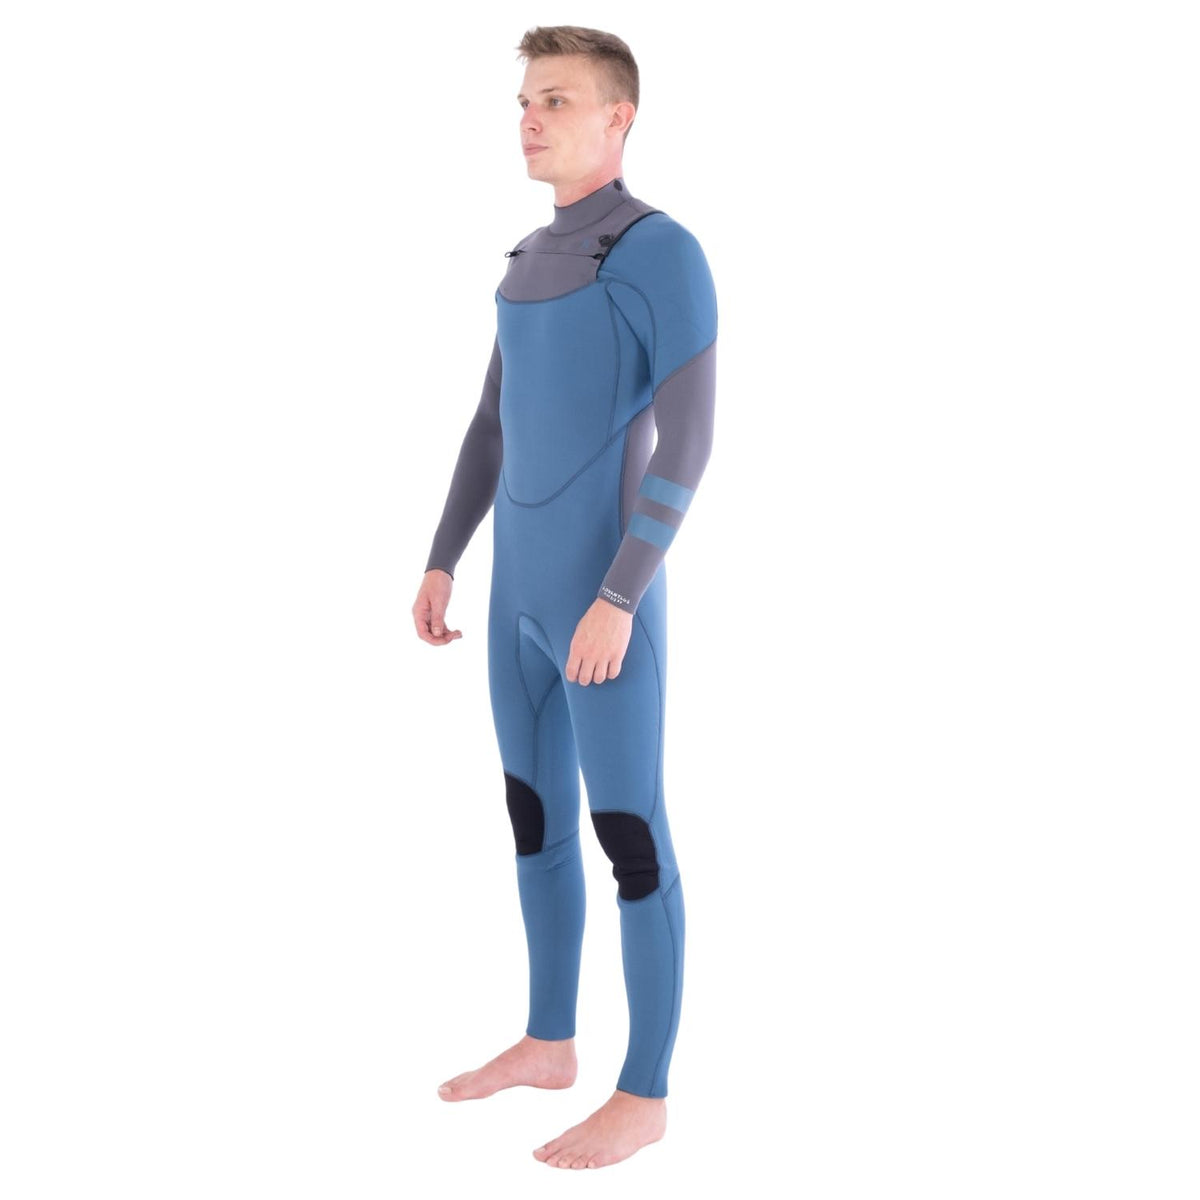 Hurley 5/3 Advantage Plus Chest Zip Full Wetsuit - Copen Blue - Mens Full Length Wetsuit by Hurley